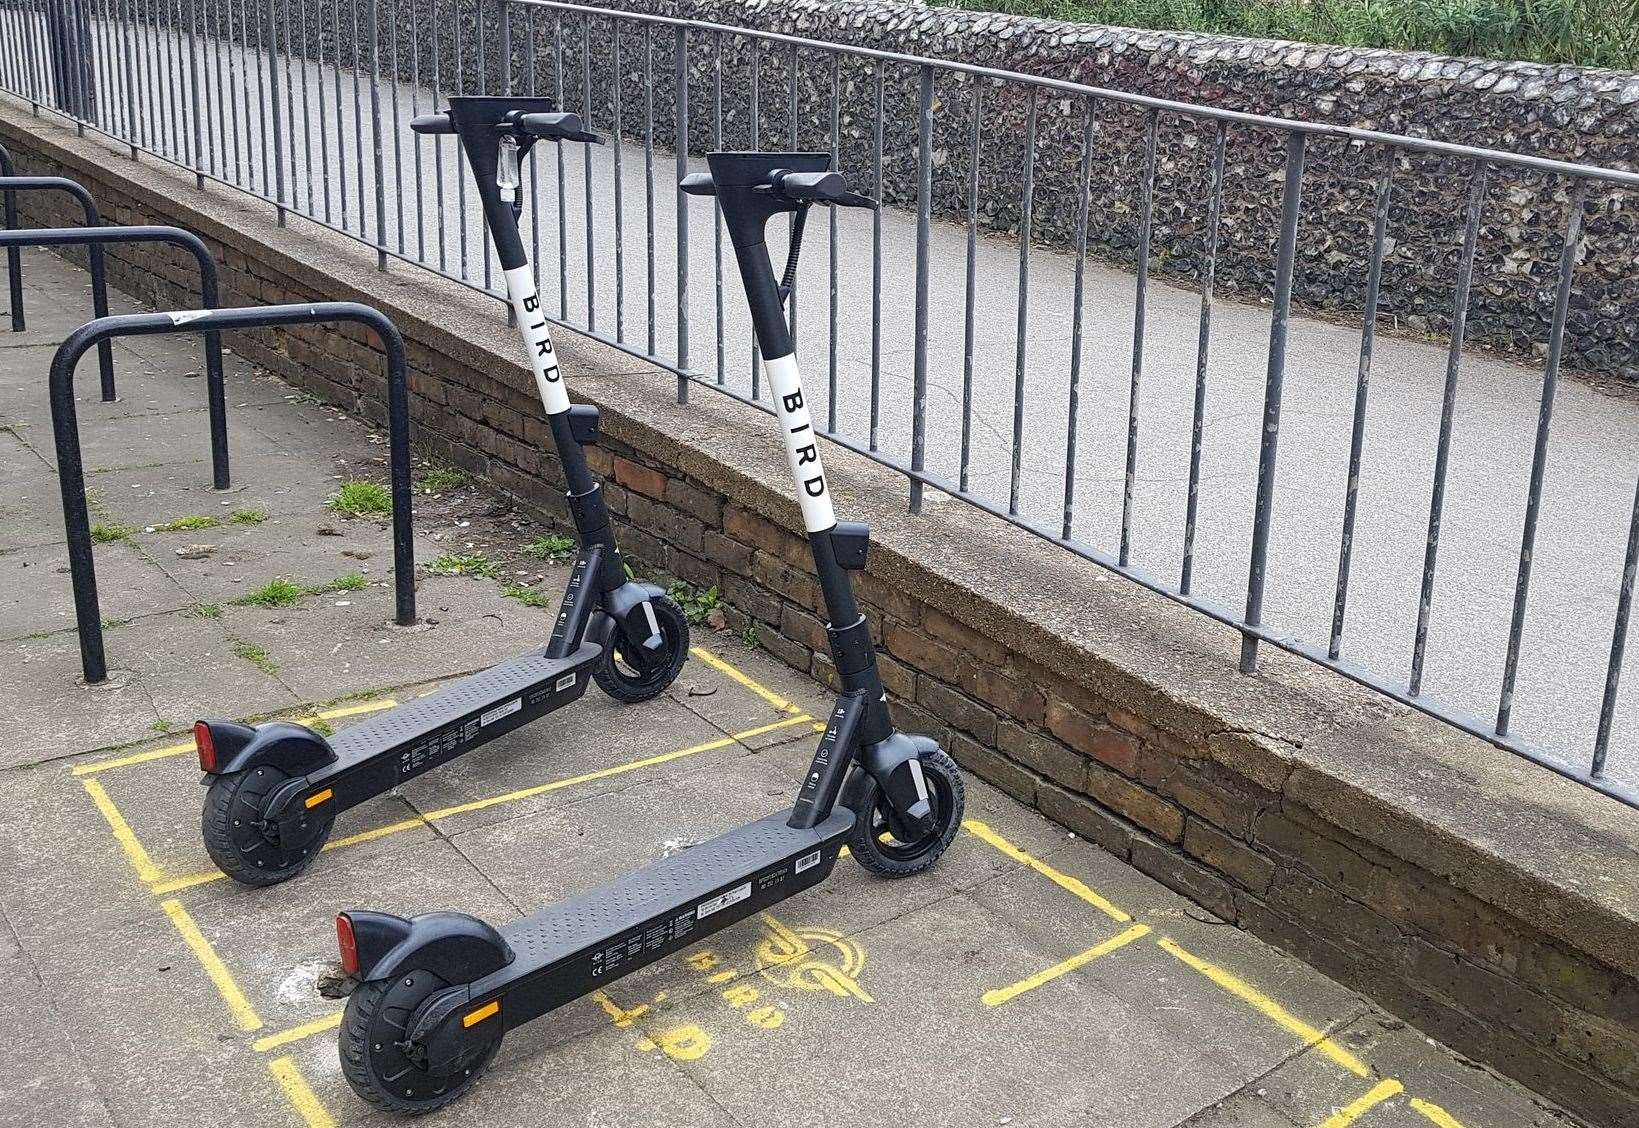 Bird e scooters have been available to rent in Canterbury since November 2020